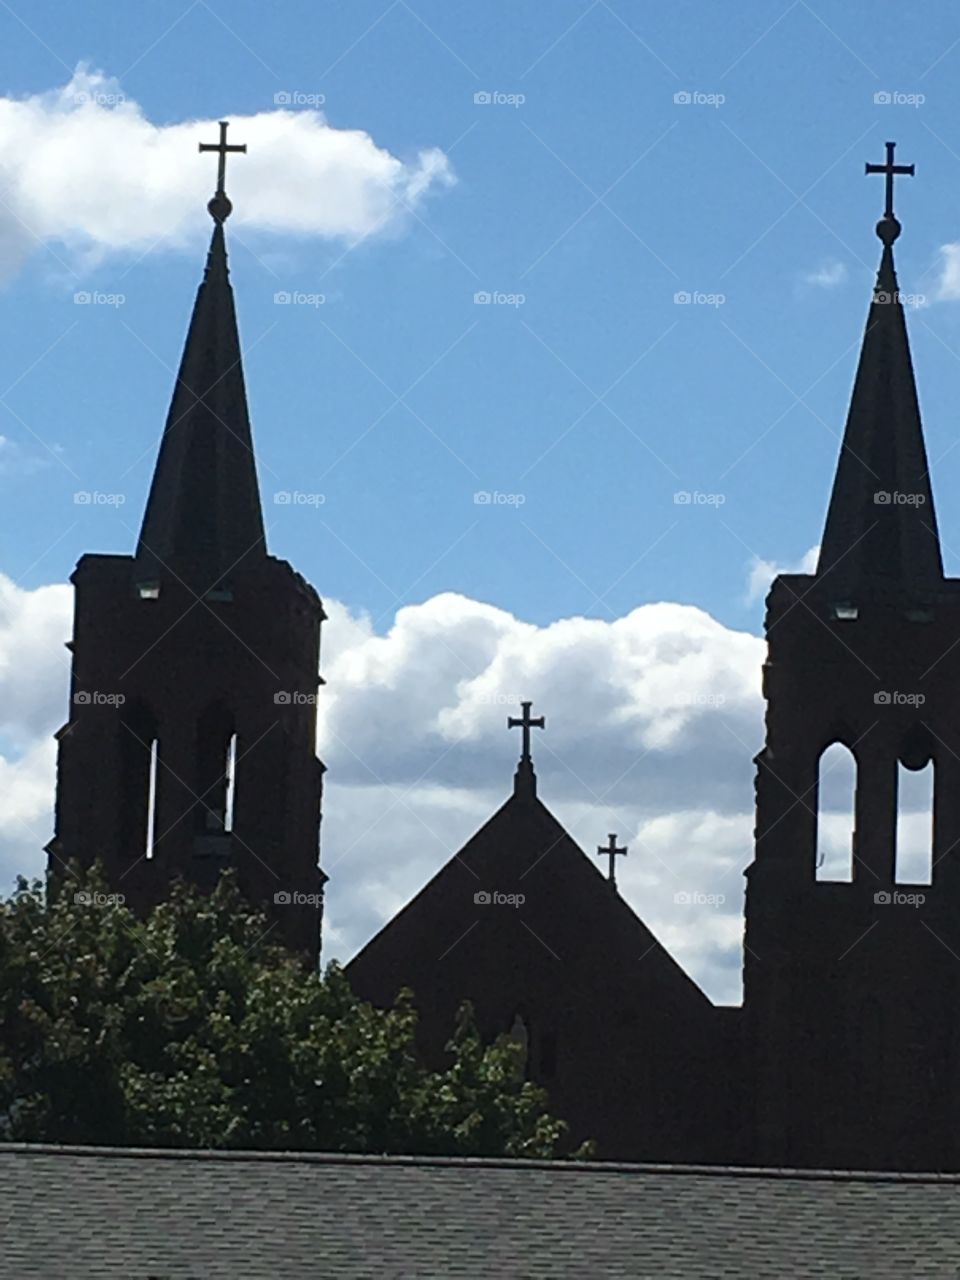 Church tower silhouettes with four crosses